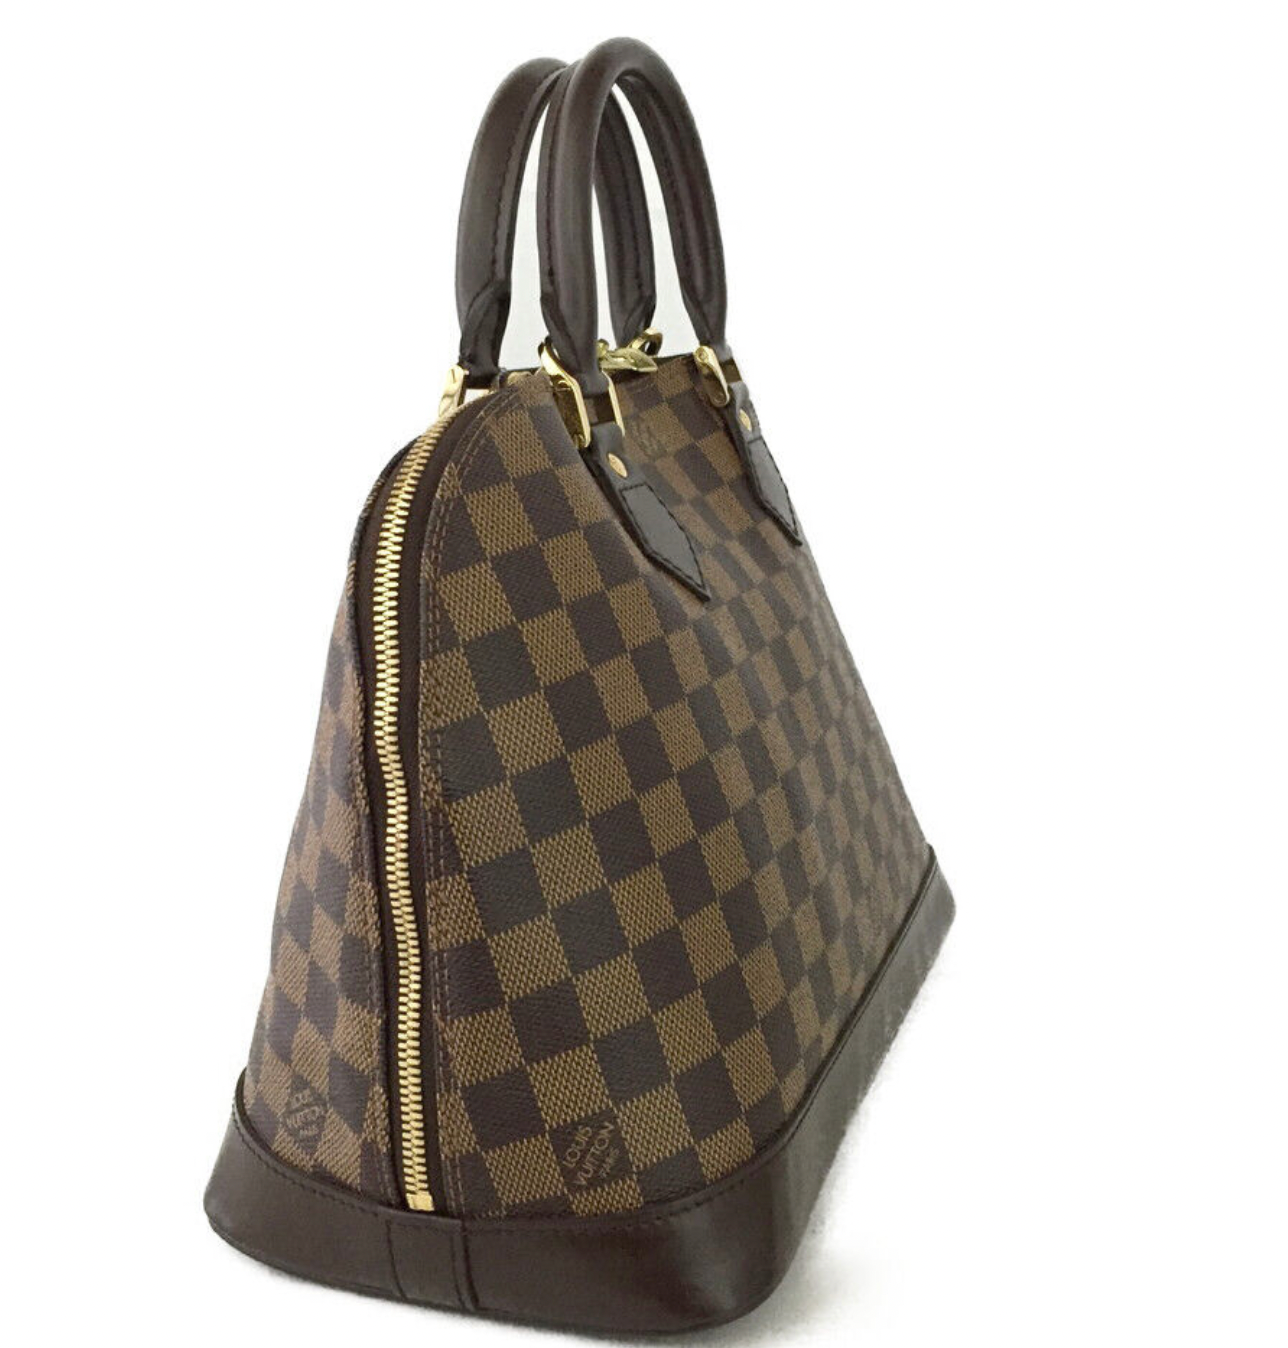 Louis Vuitton Totem Bag and Accessories Reference Guide - Spotted